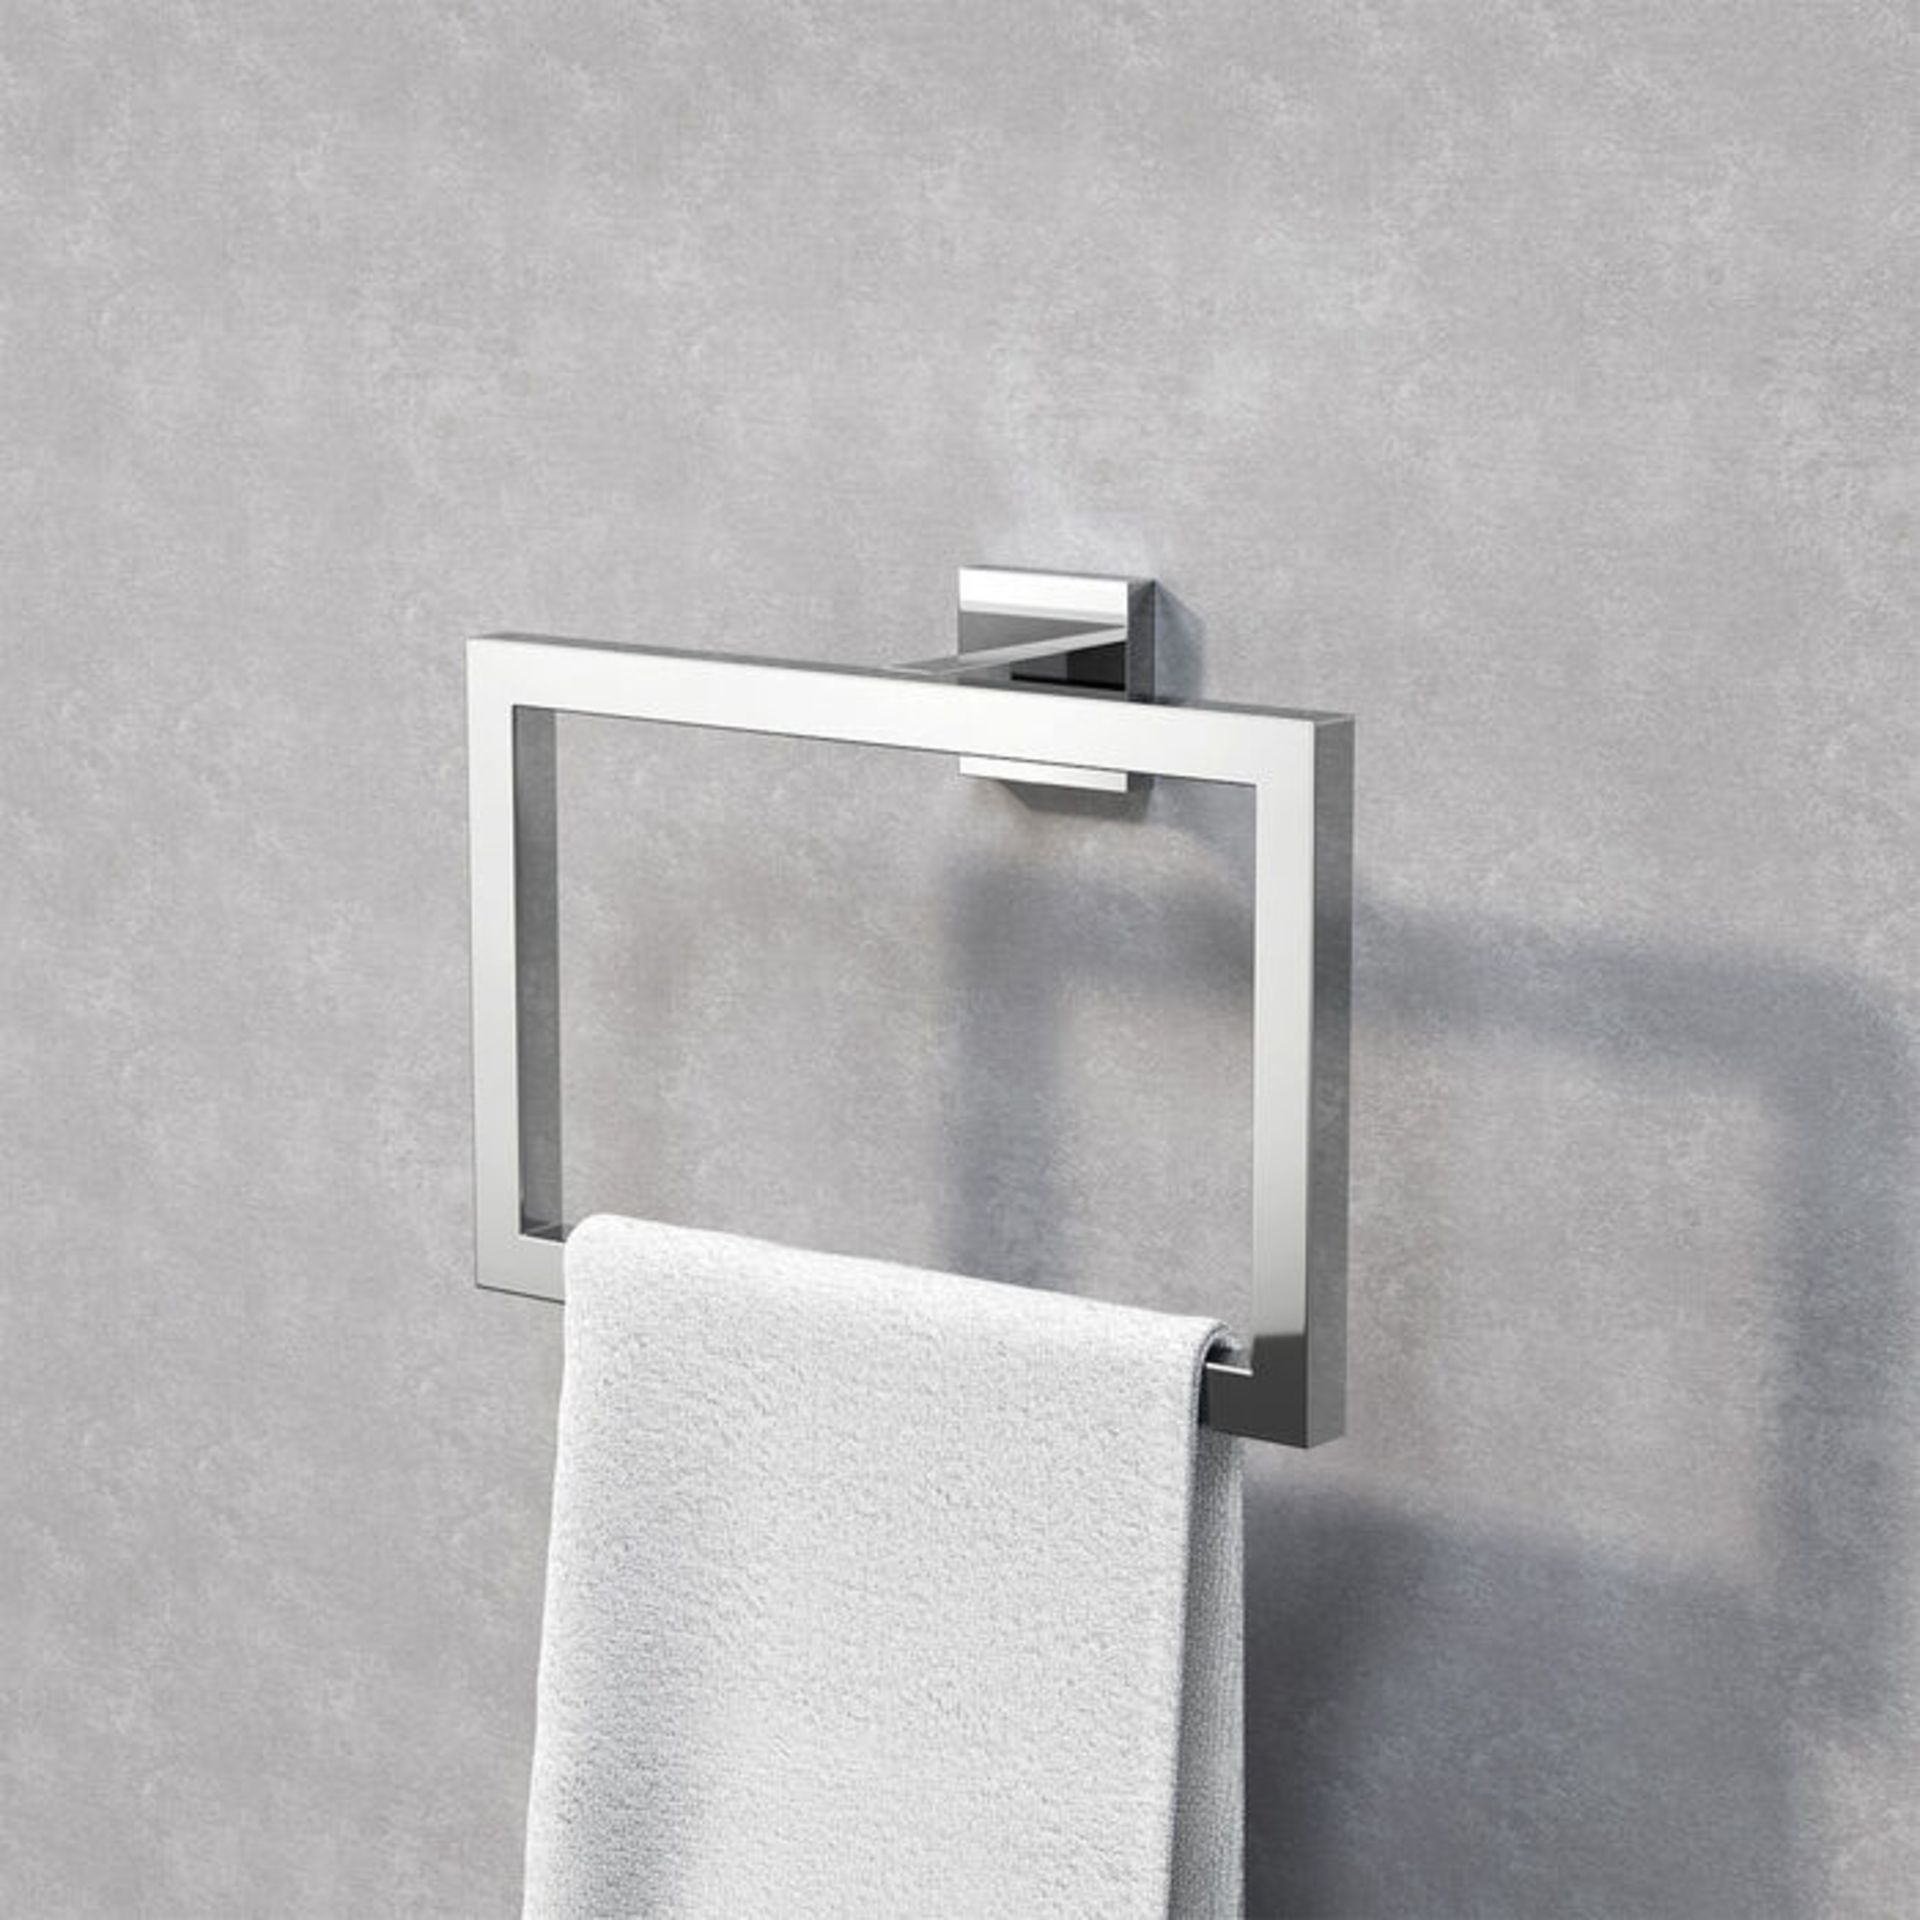 (RK1042) Jesmond Towel Ring Finishes your bathroom with a little extra functionality and style... - Image 2 of 2